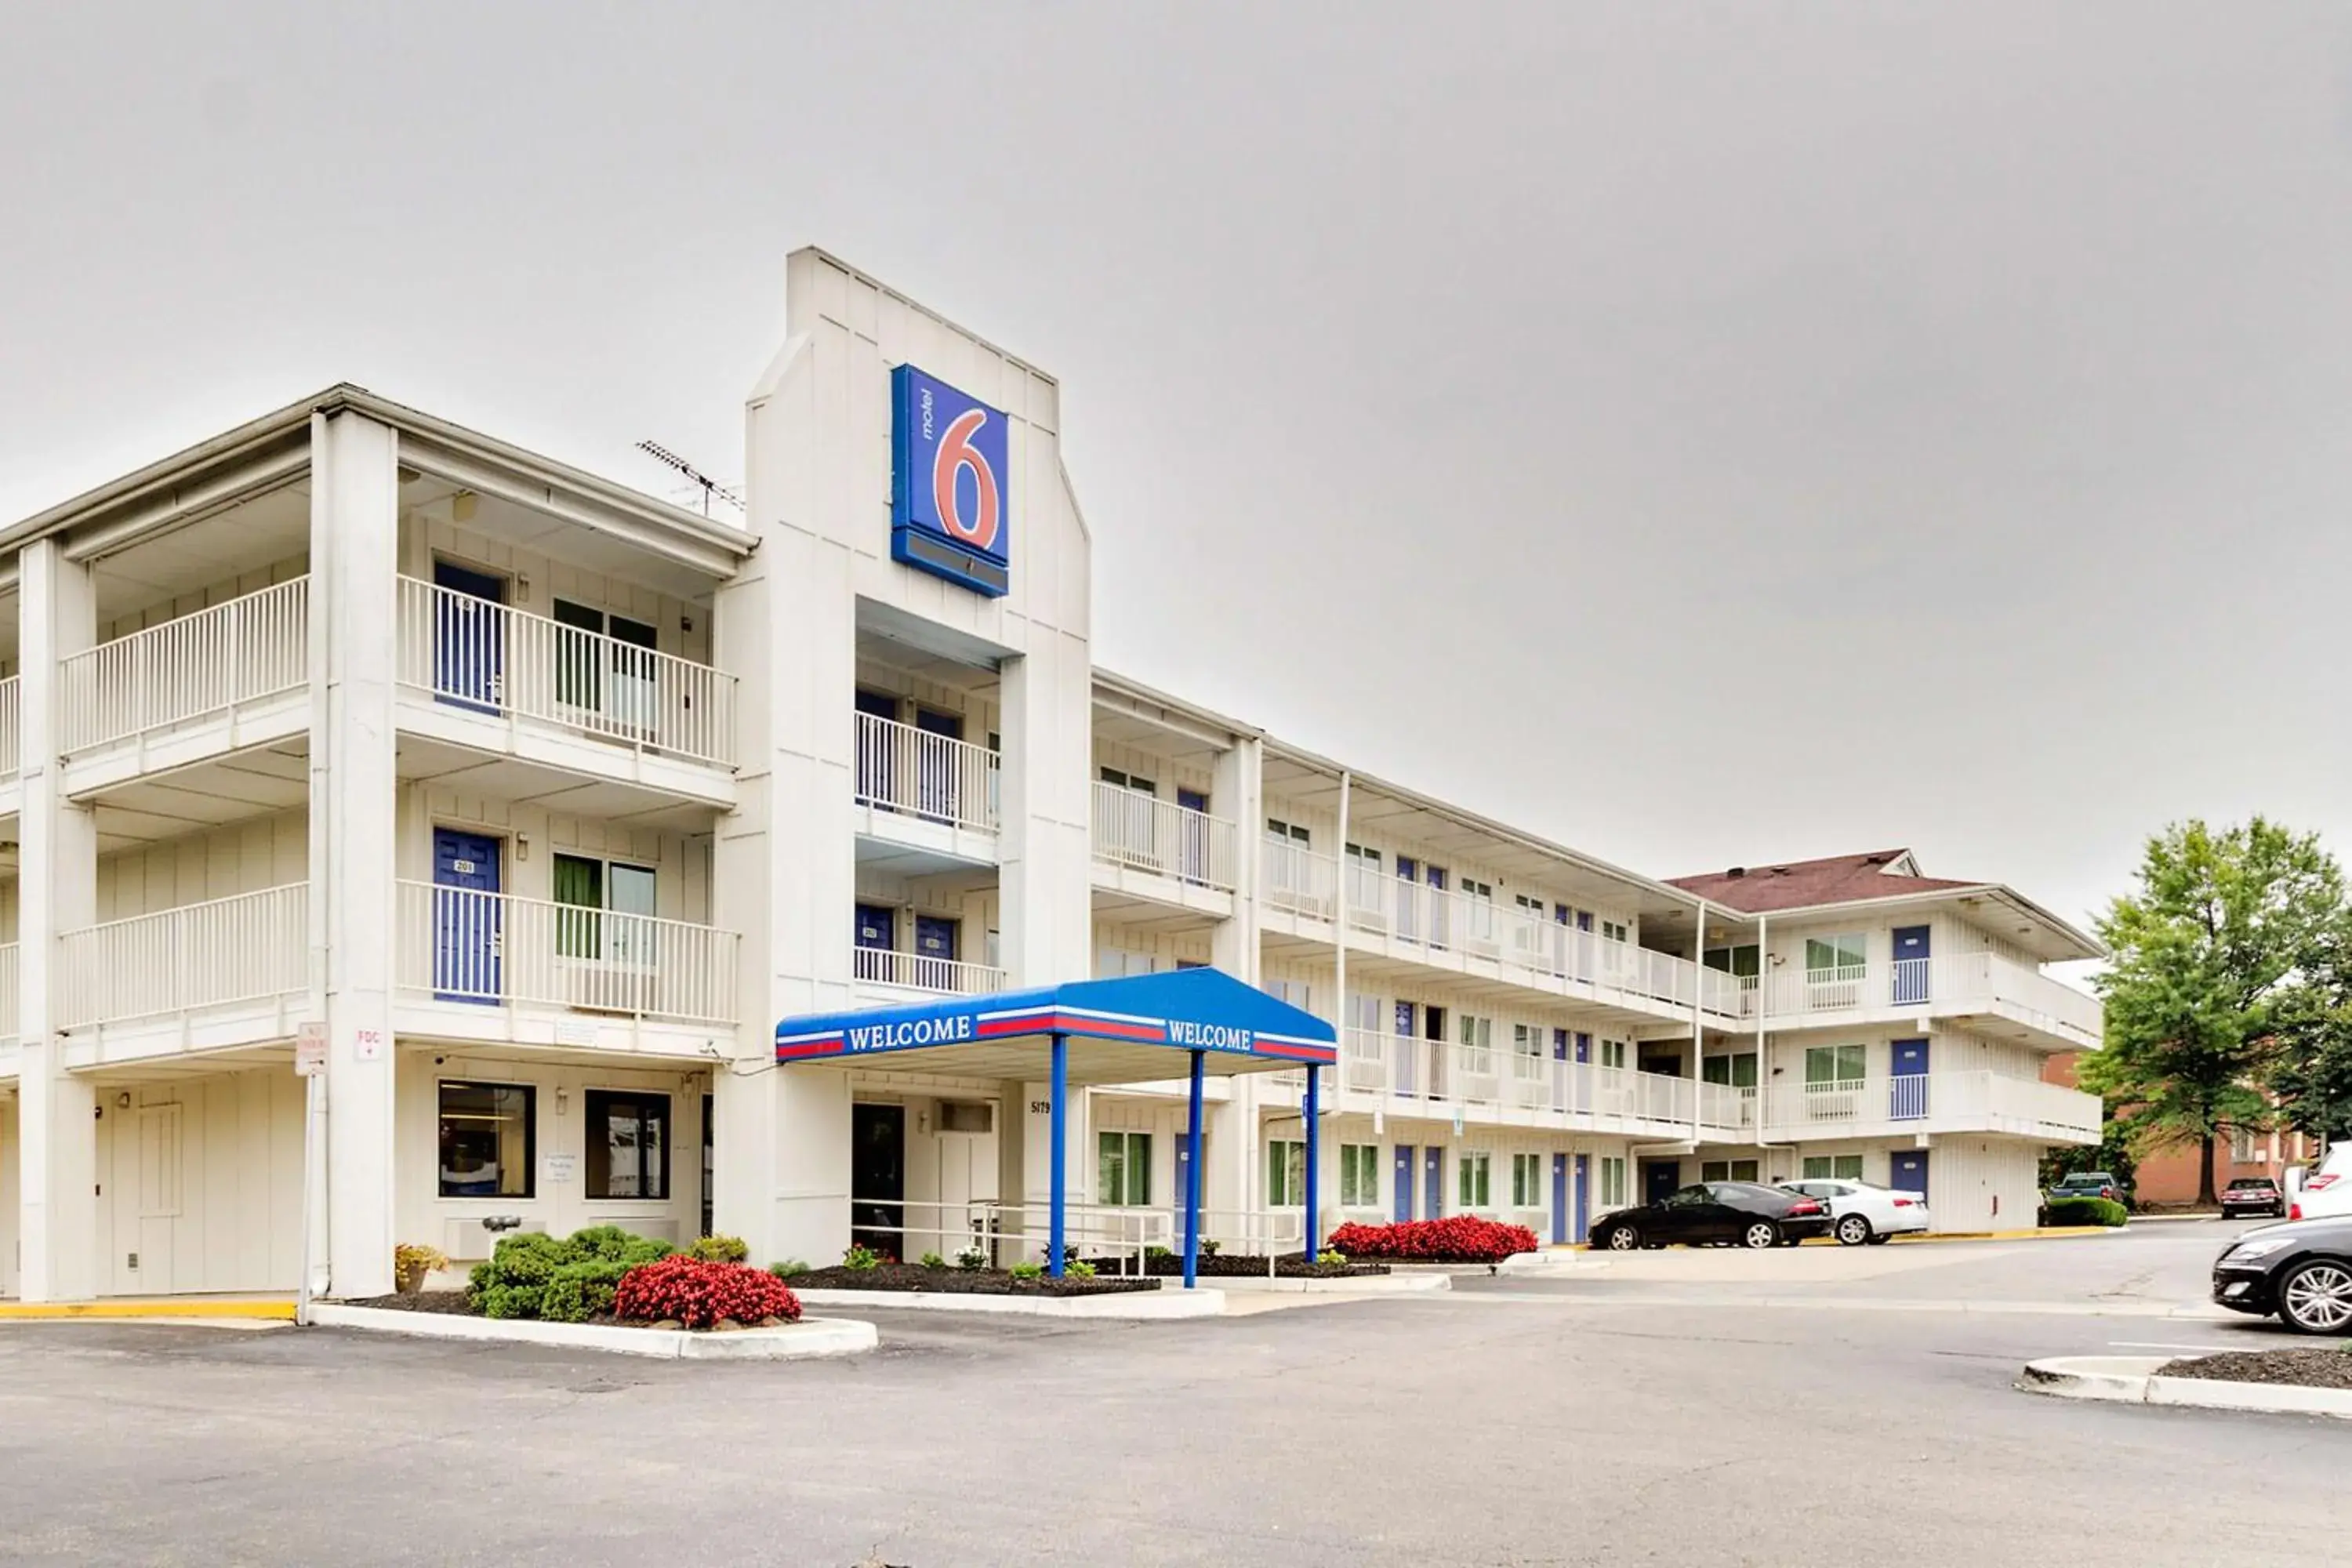 Property Building in Motel 6-Linthicum Heights, MD - BWI Airport